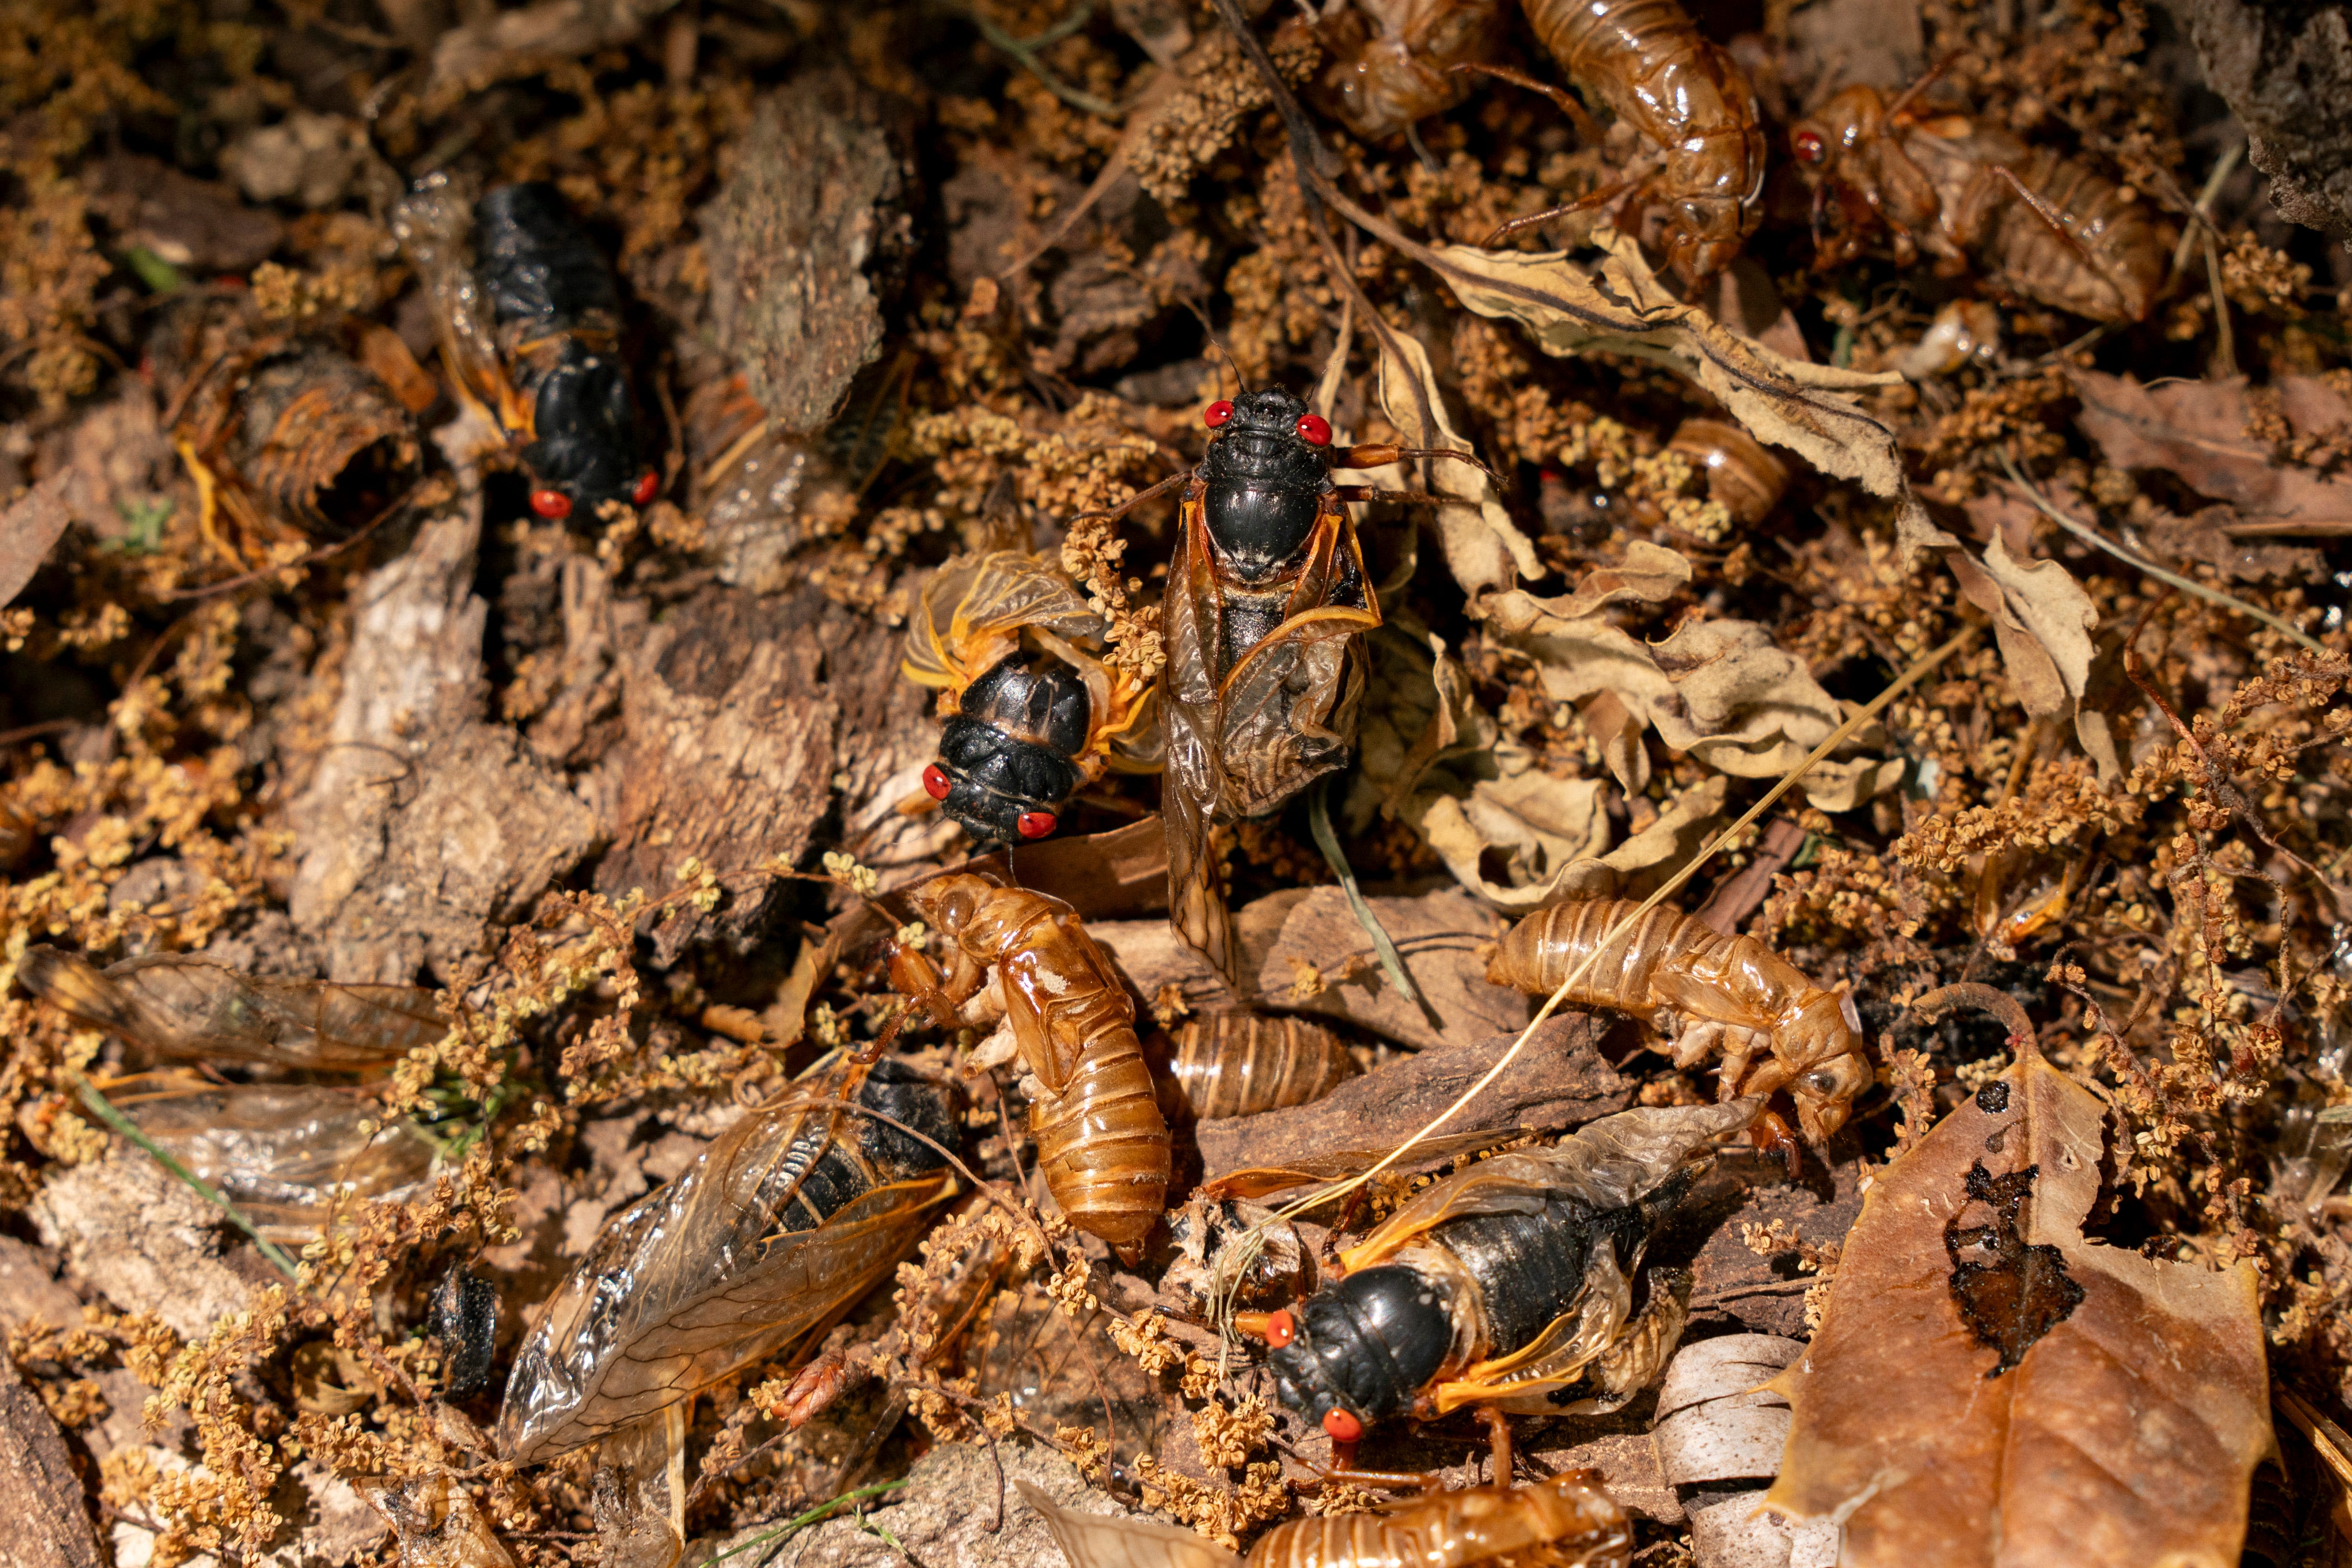 Surprisingly, cicada broods keep going extinct. Some experts are working to save them.